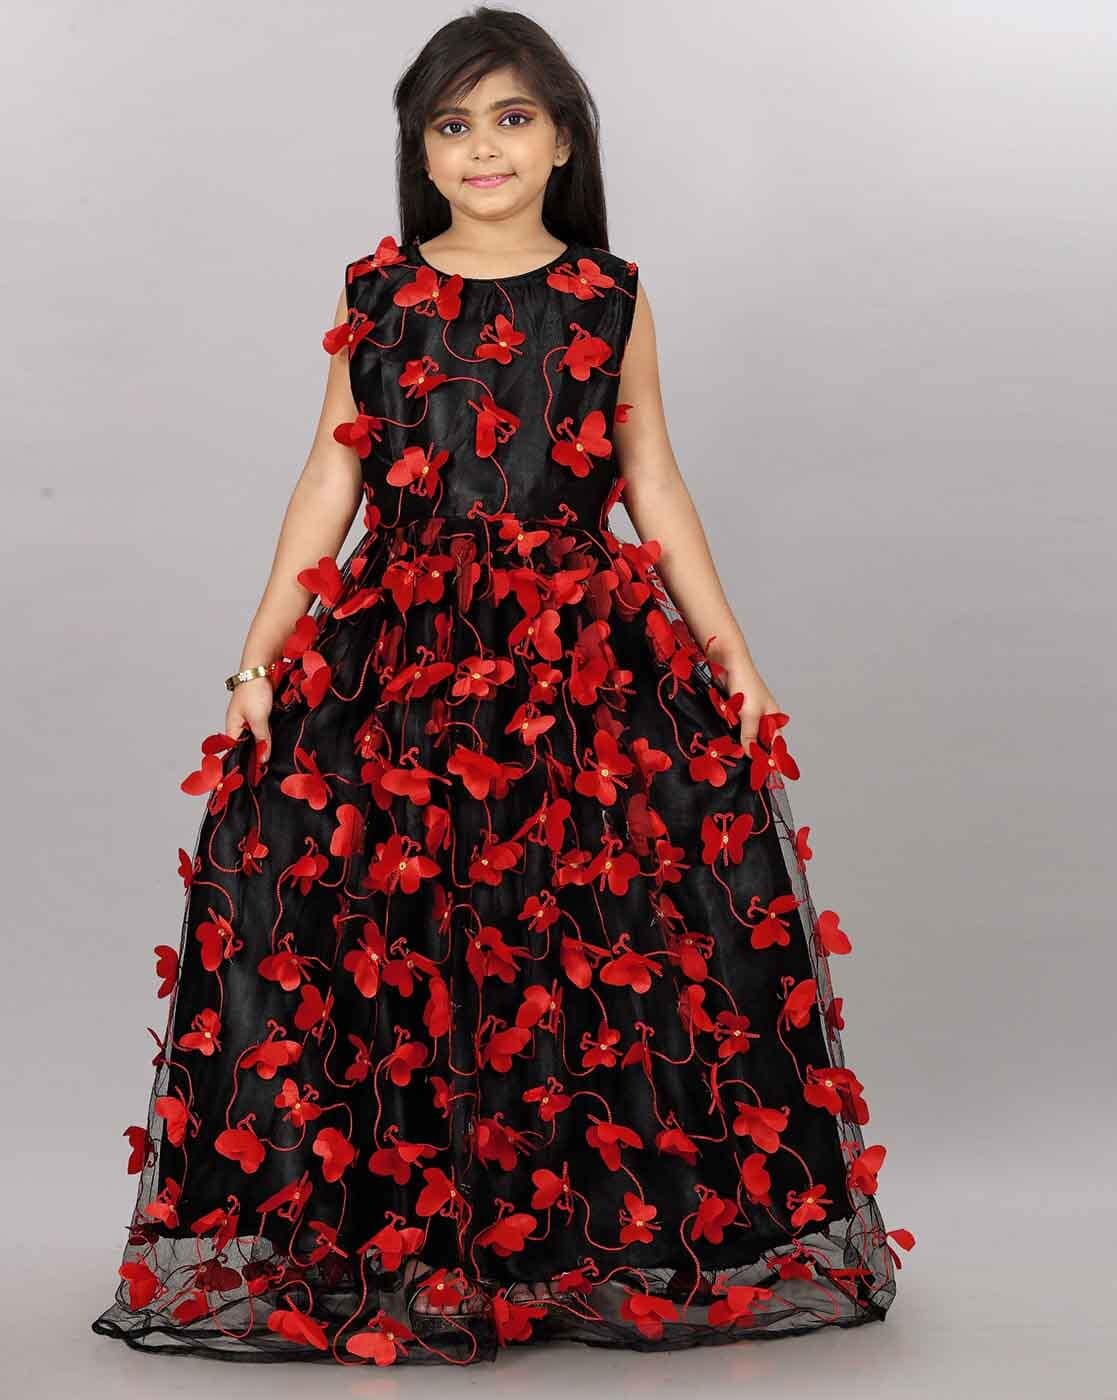 Red With Black Quinceanera Dresses Sweet 16 Organza Ruffles Appliques Ball  Gown | eBay